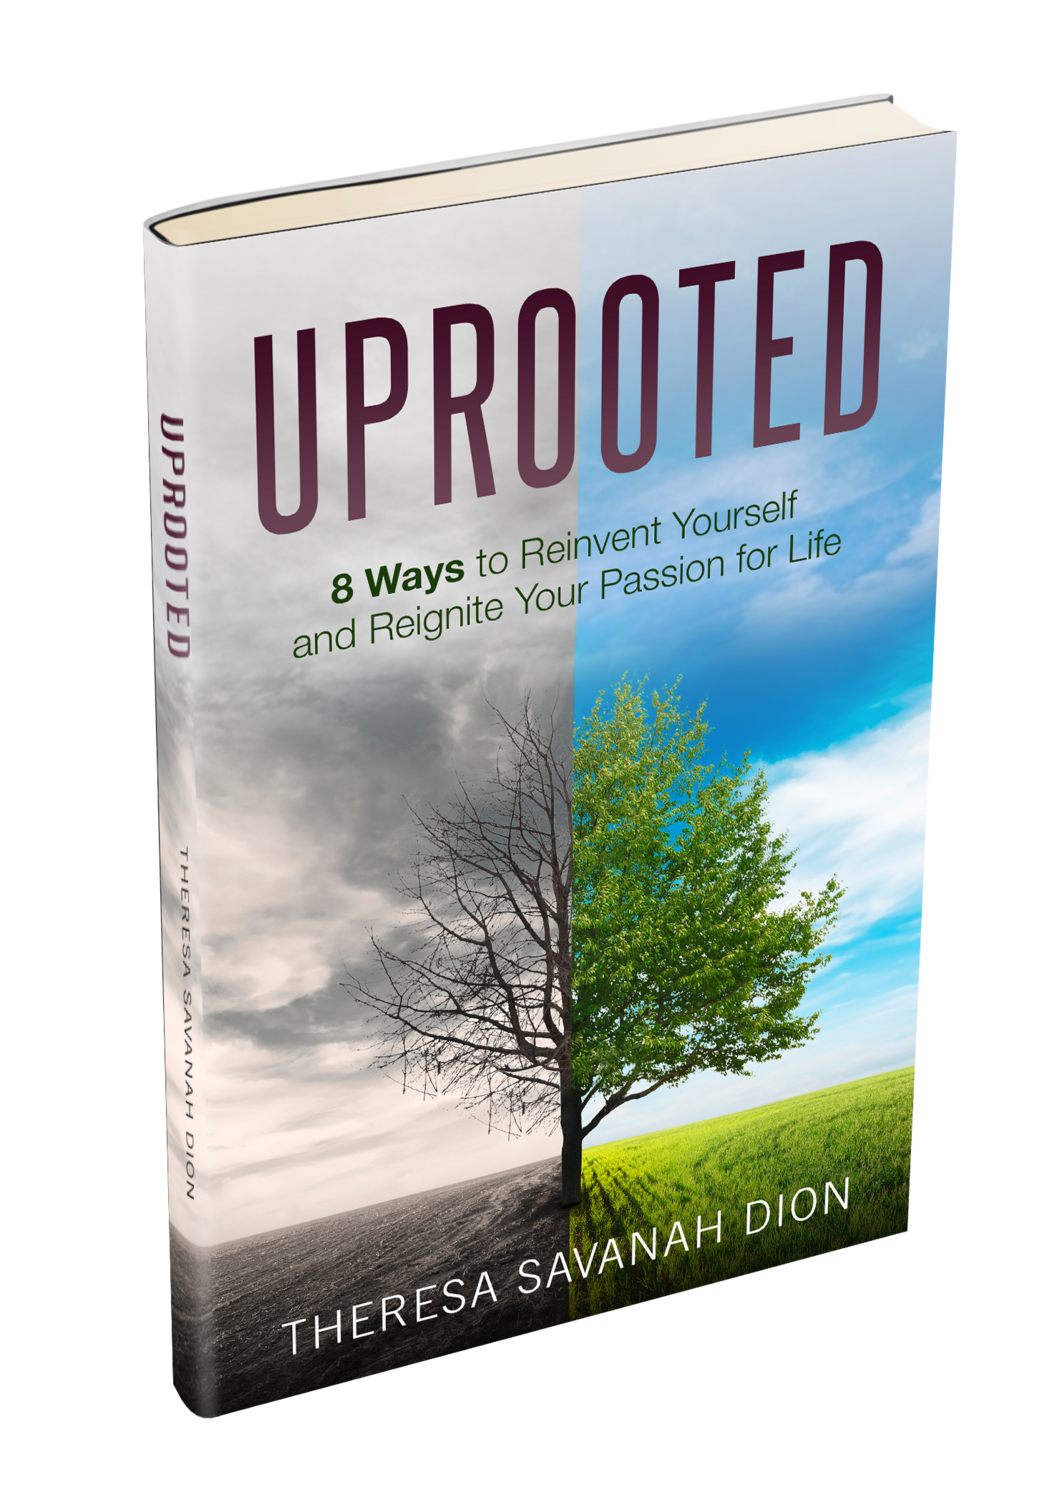 UPROOTED- 8 Ways to Reinvent Yourself and Reignite Your Passion for Life -soft cover version-70 pages